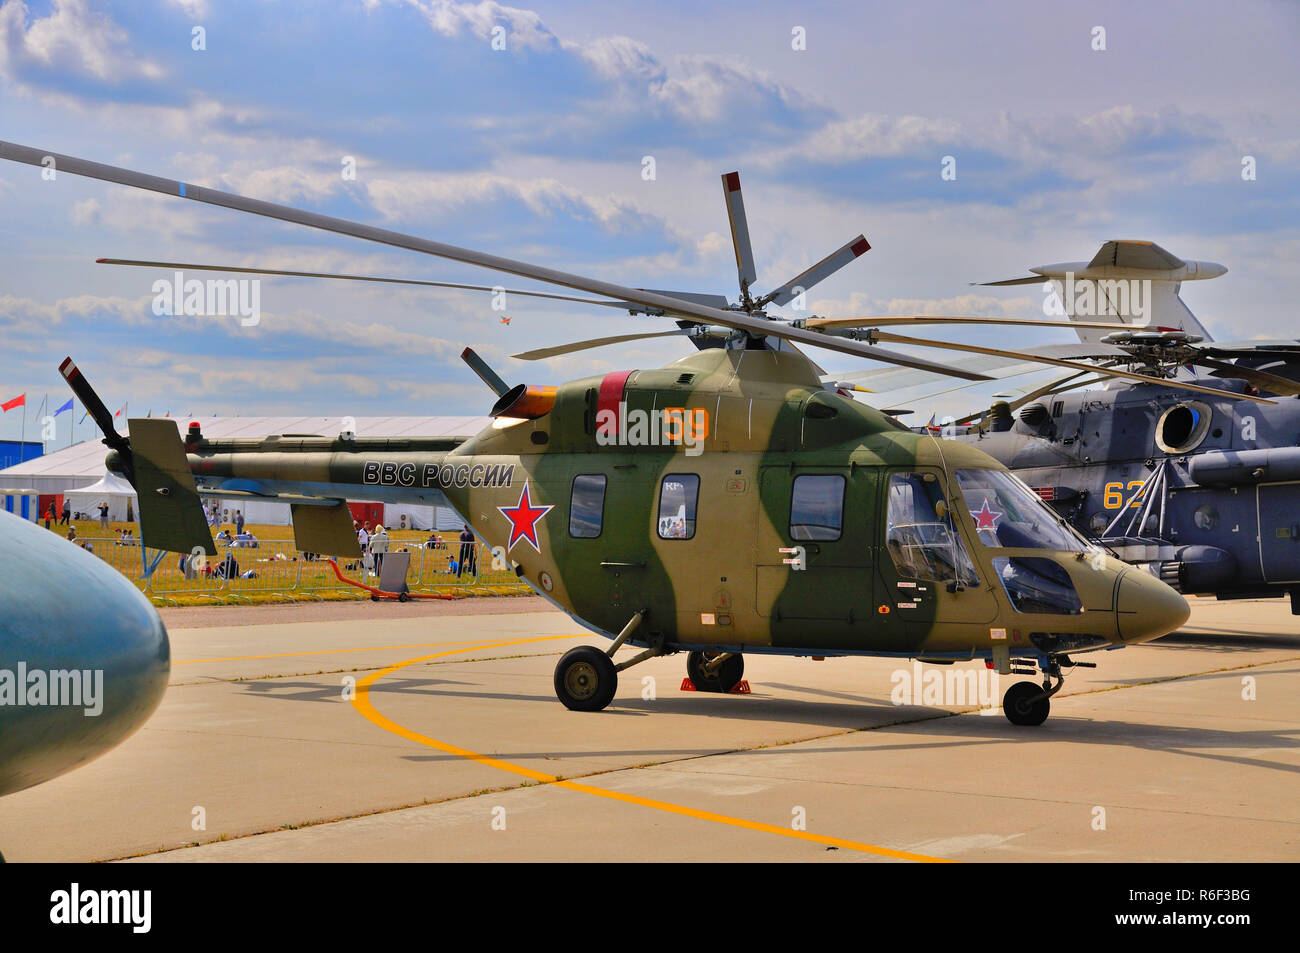 MOSCOW, RUSSIA - AUG 2015: transport helicopter Mi-38 presented at the 12th MAKS-2015 International Aviation and Space Show on August 28, 2015 in Mosc Stock Photo